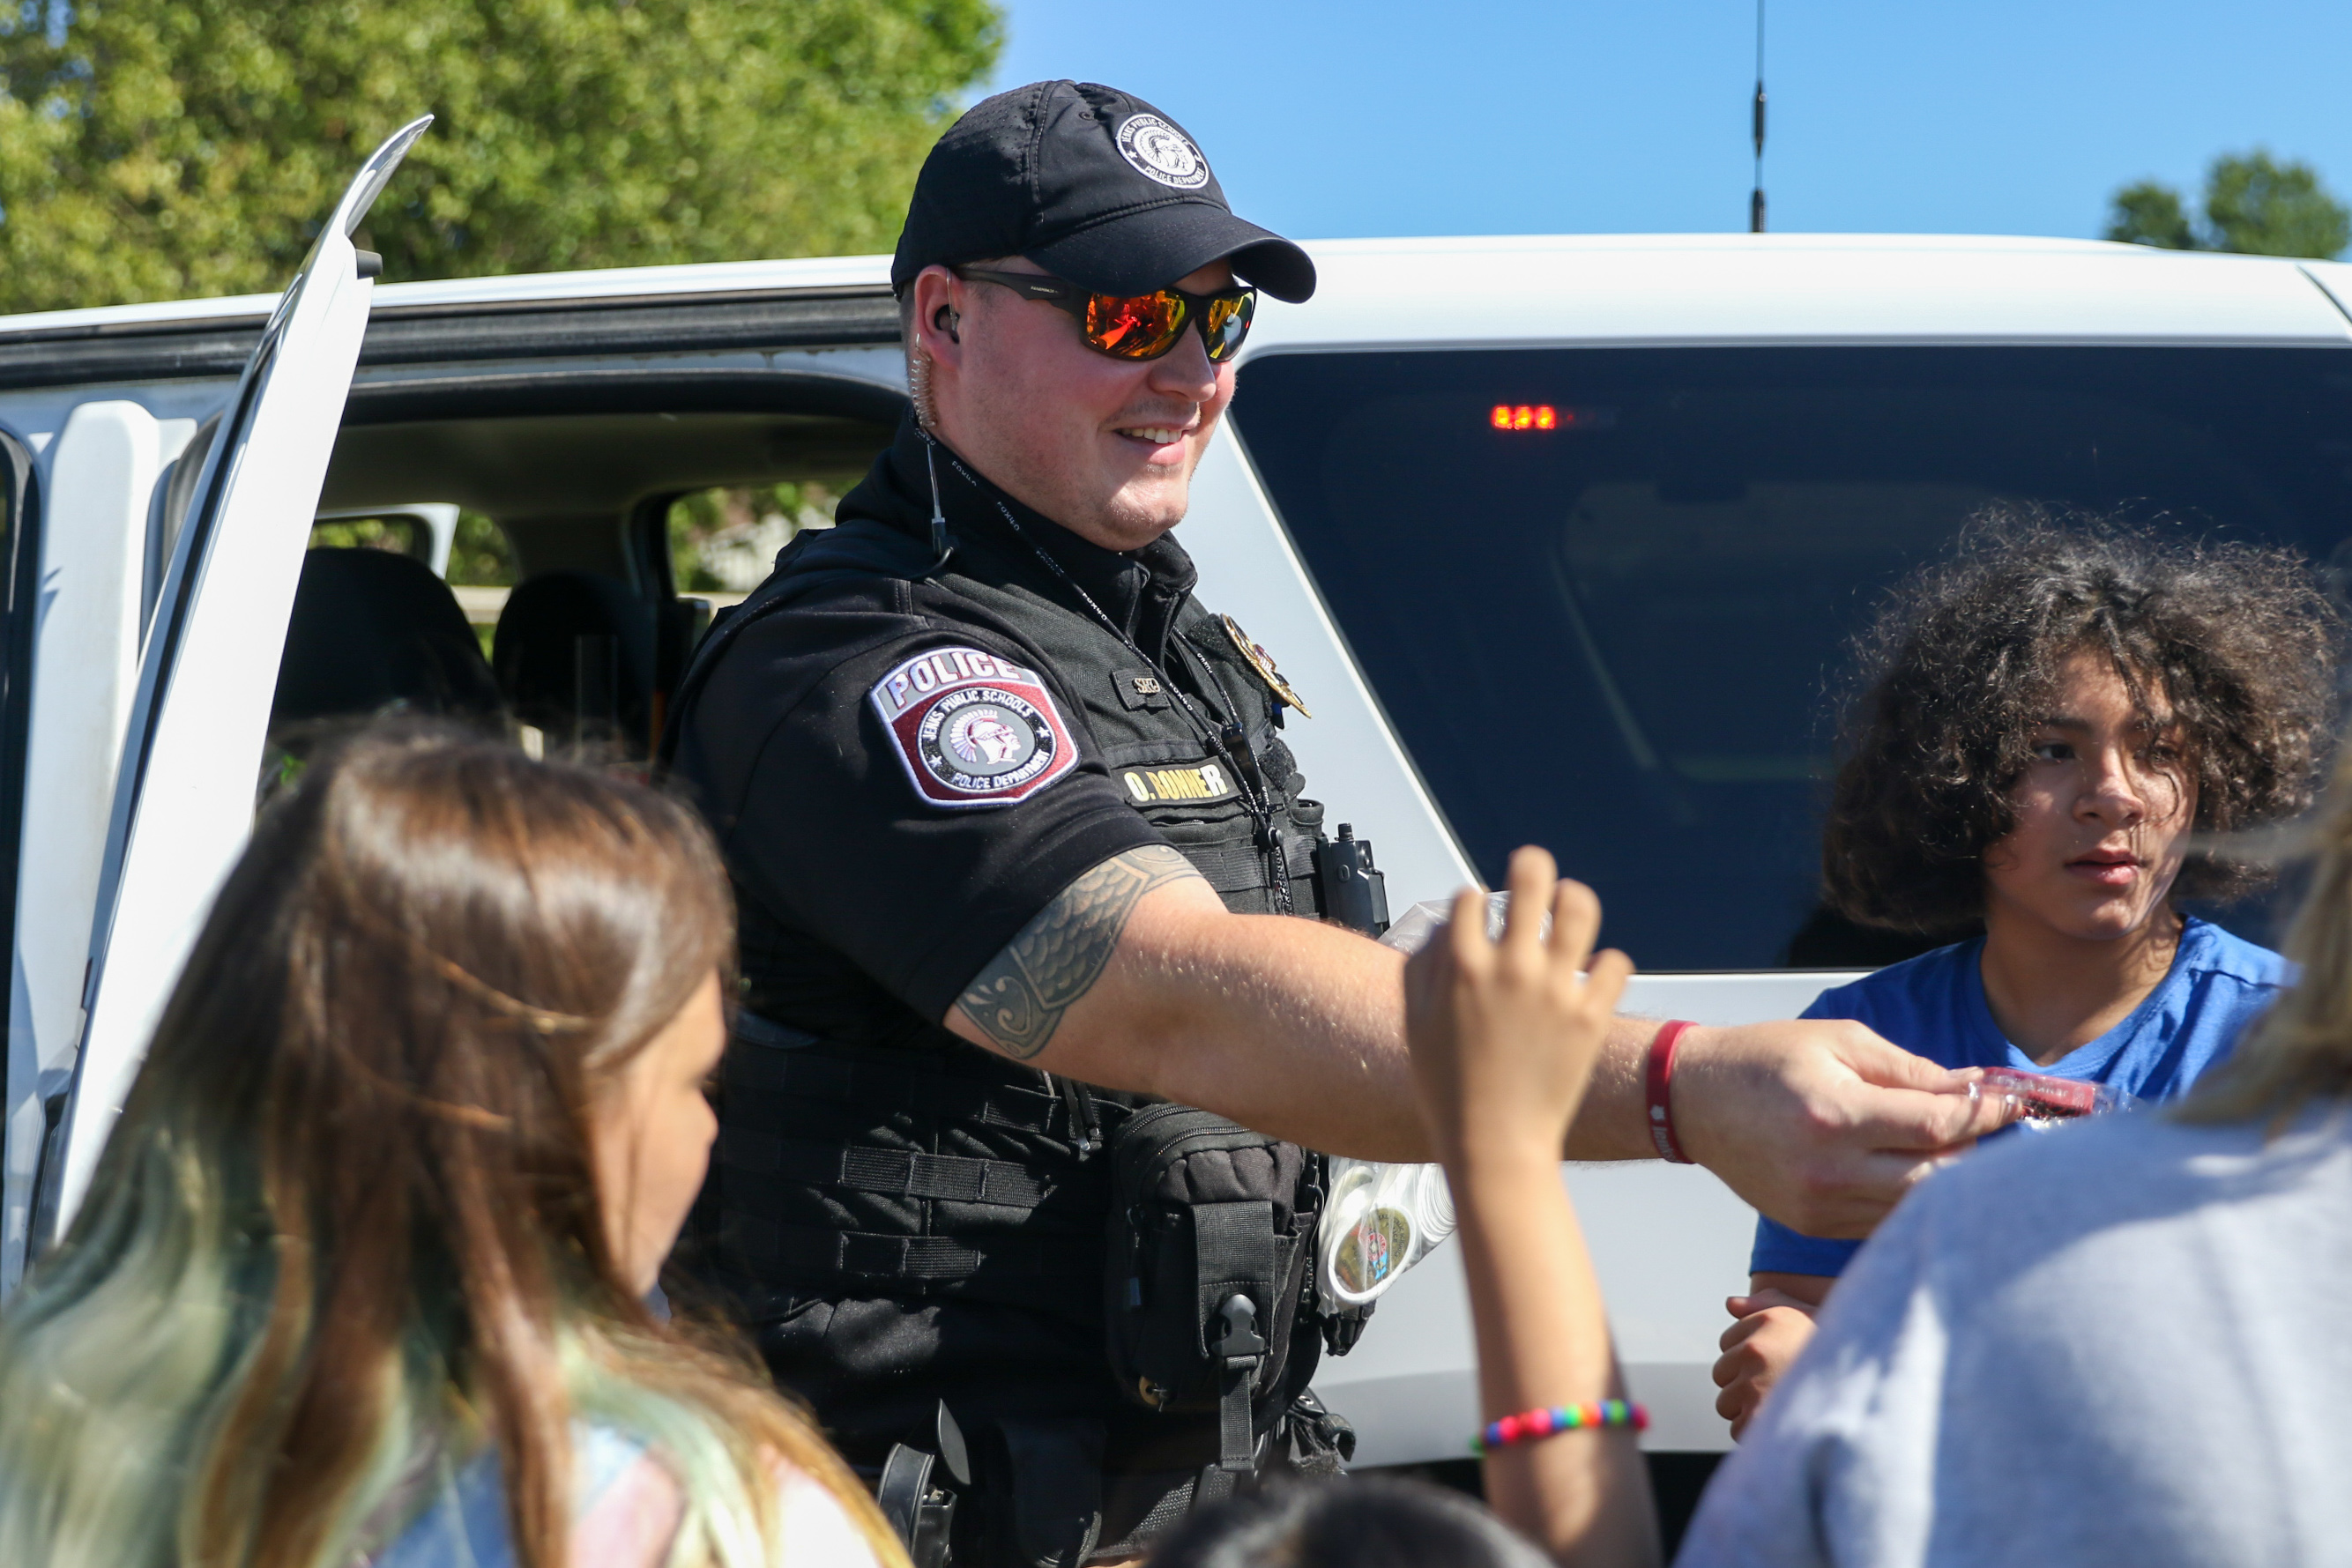 JPS police officer interacting with students